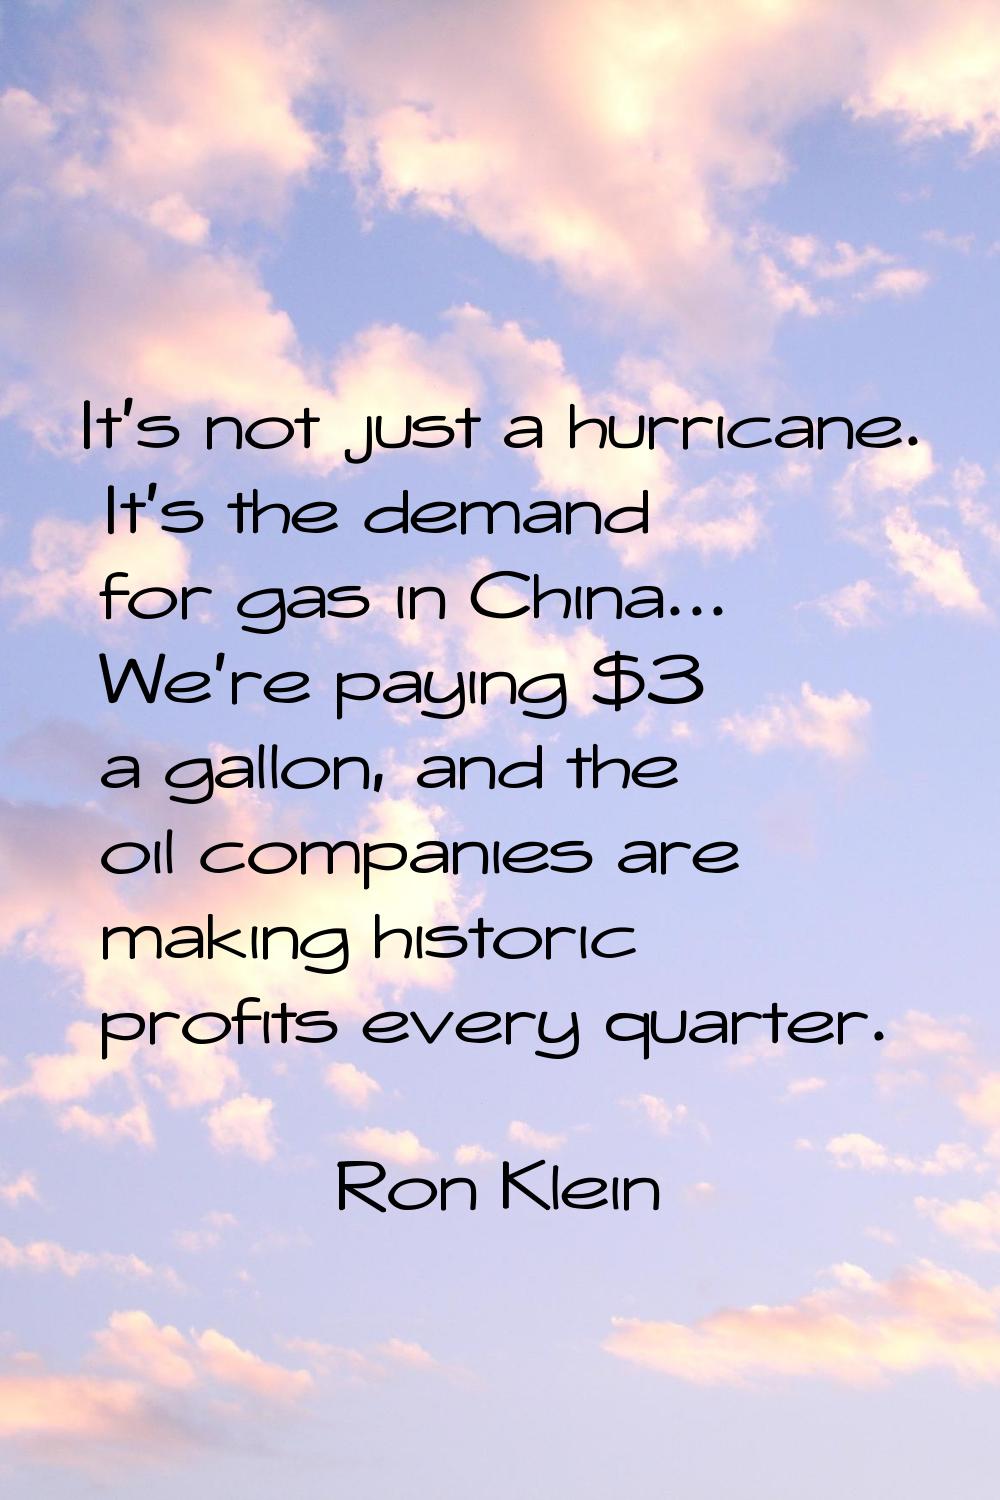 It's not just a hurricane. It's the demand for gas in China... We're paying $3 a gallon, and the oi